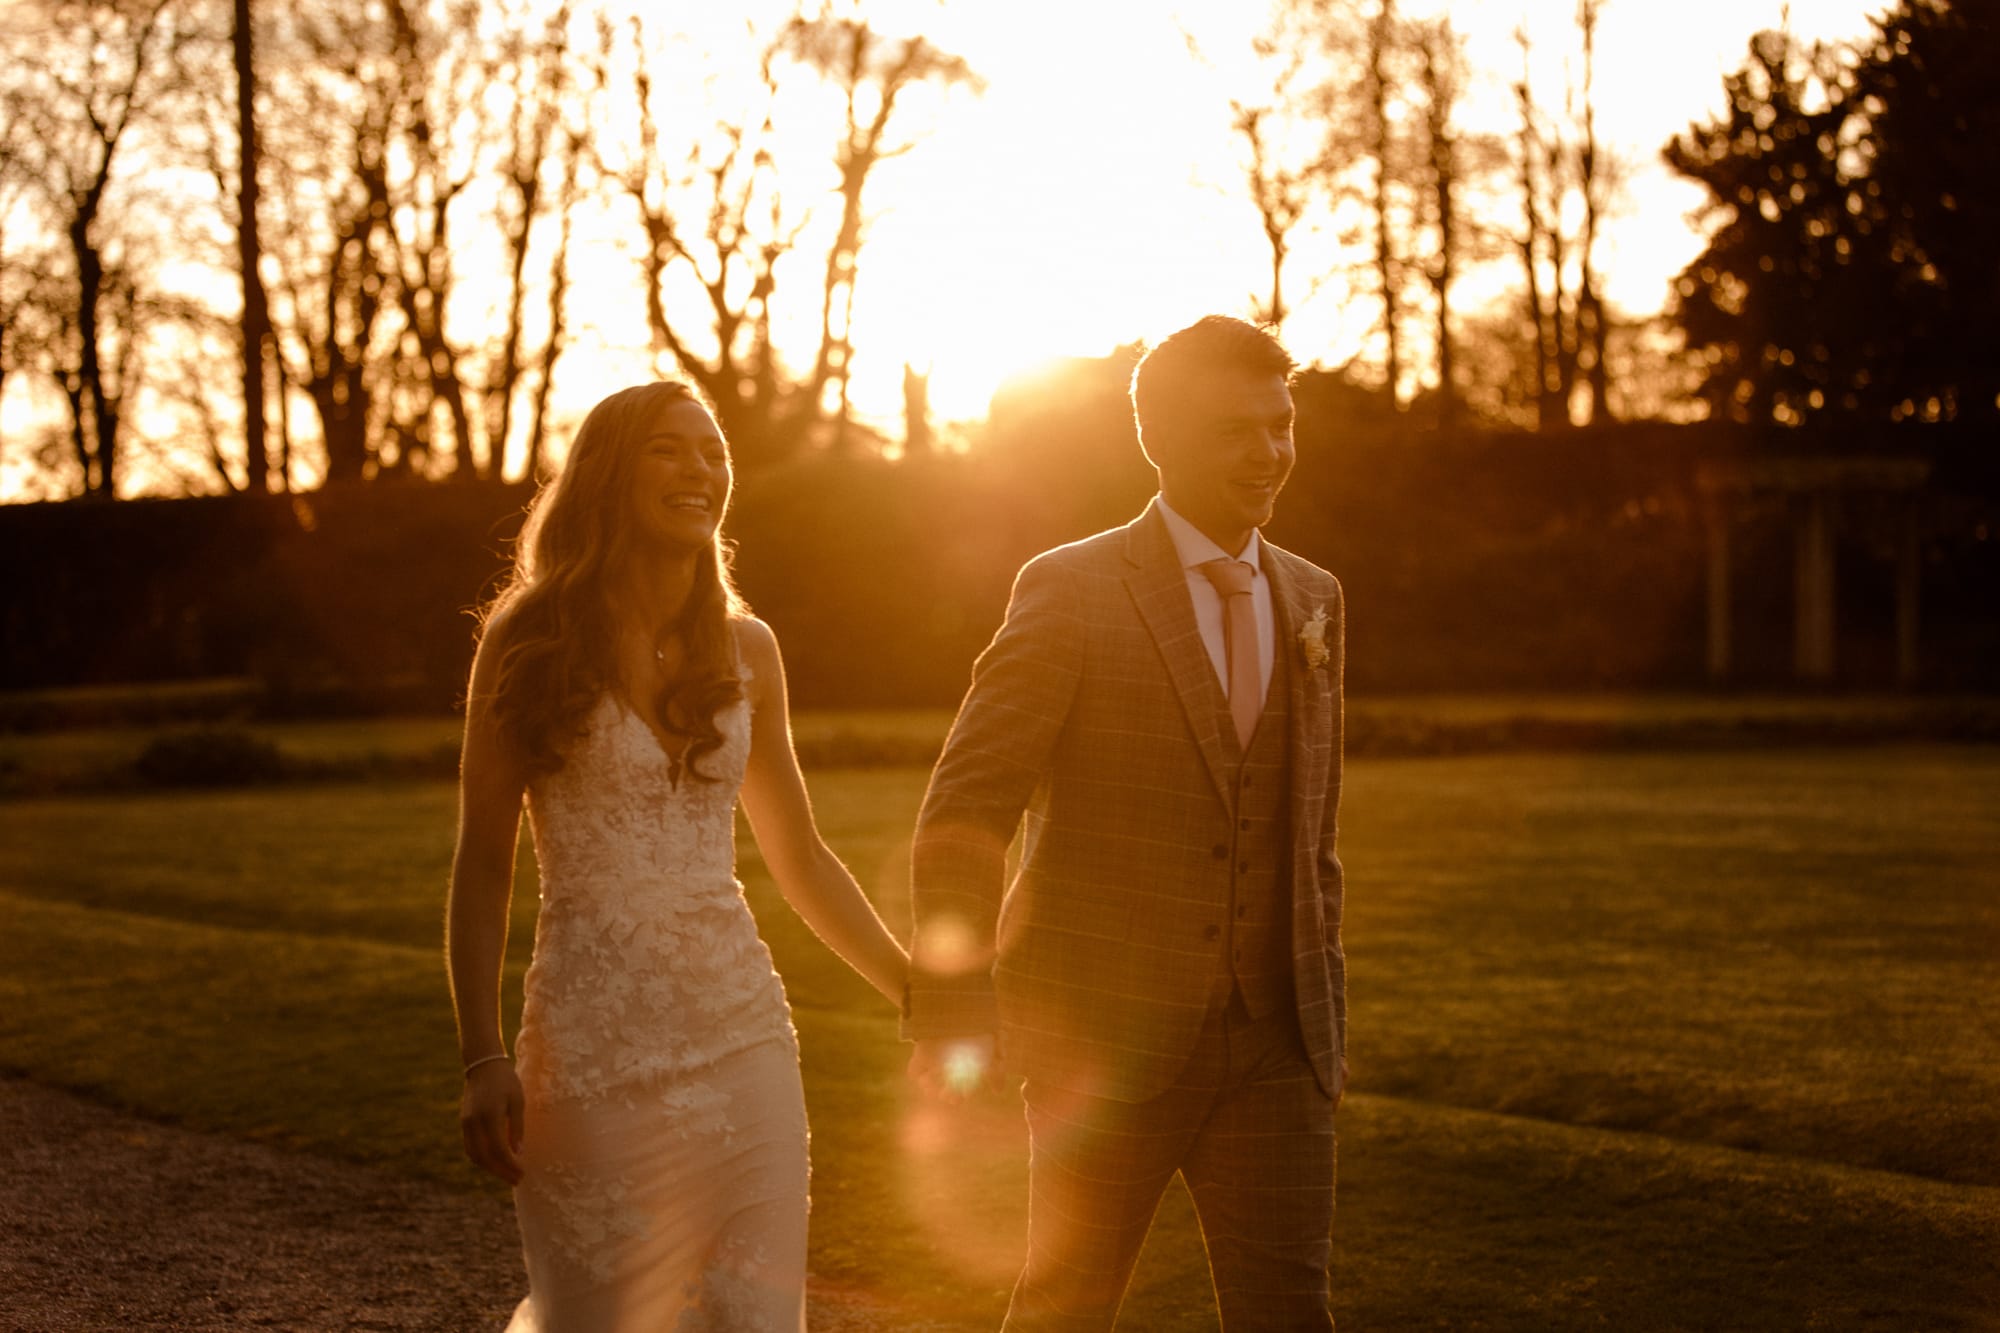 Lauren and Patrick at sunset at Eaves Hall in Cheshire. Walking through the grounds of Eaves Hall on your wedding day.